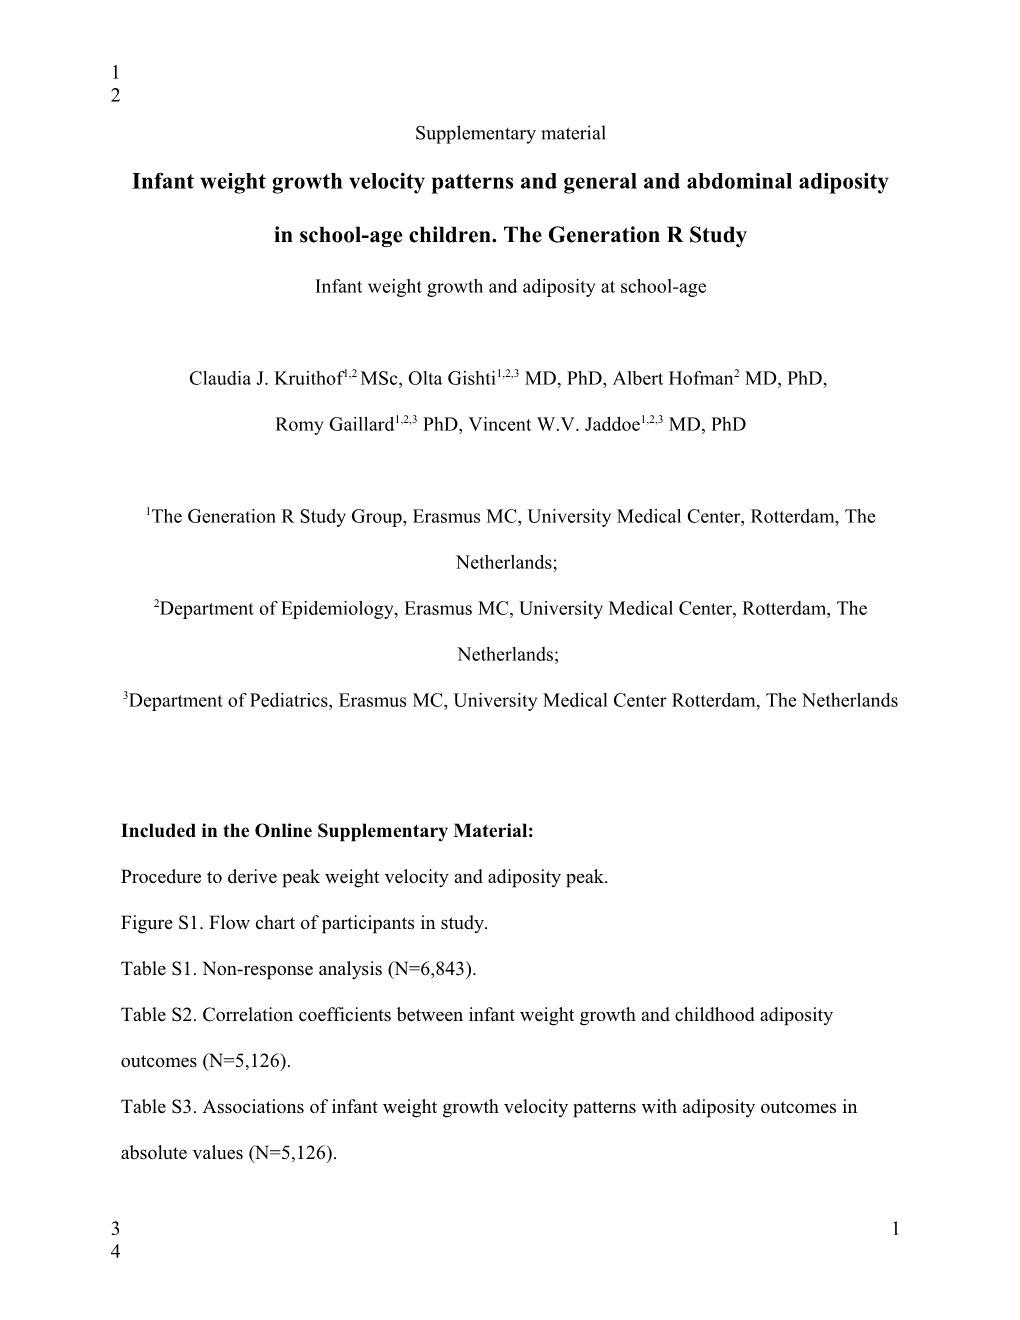 Infant Weight Growth and Adiposity at School-Age